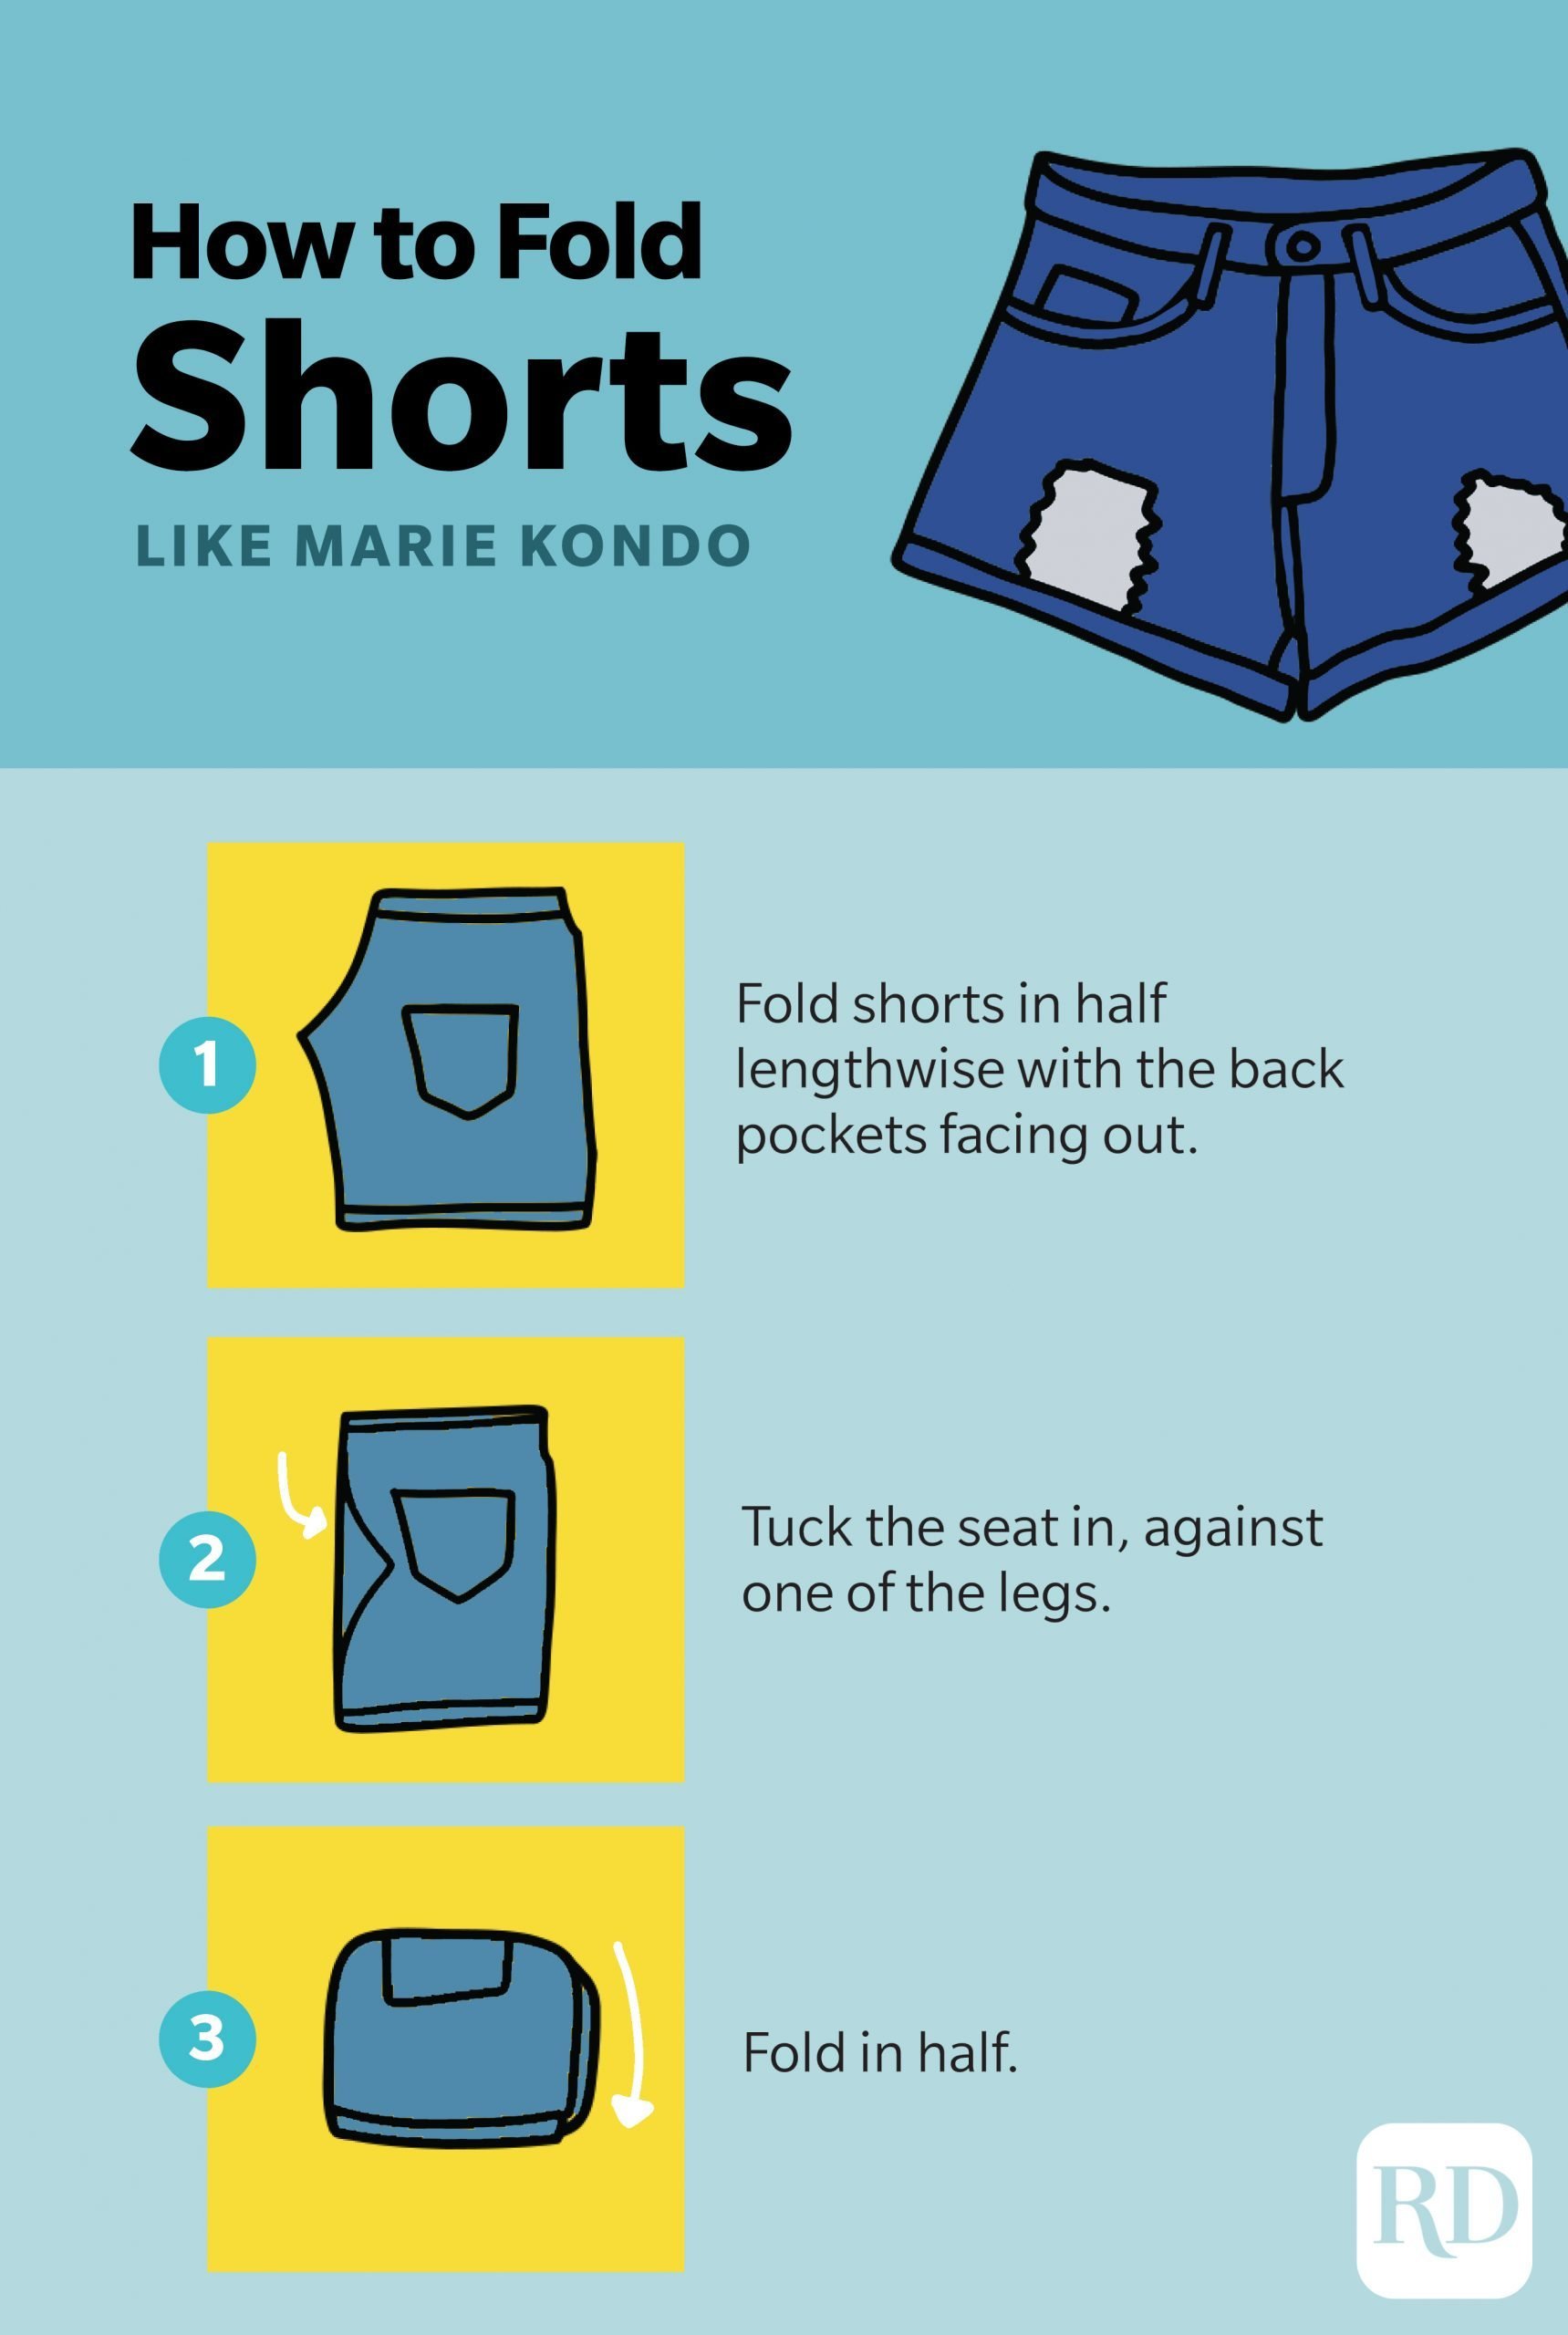 Marie Kondo Folding Guide The Ultimate Guide to How to Fold Clothes